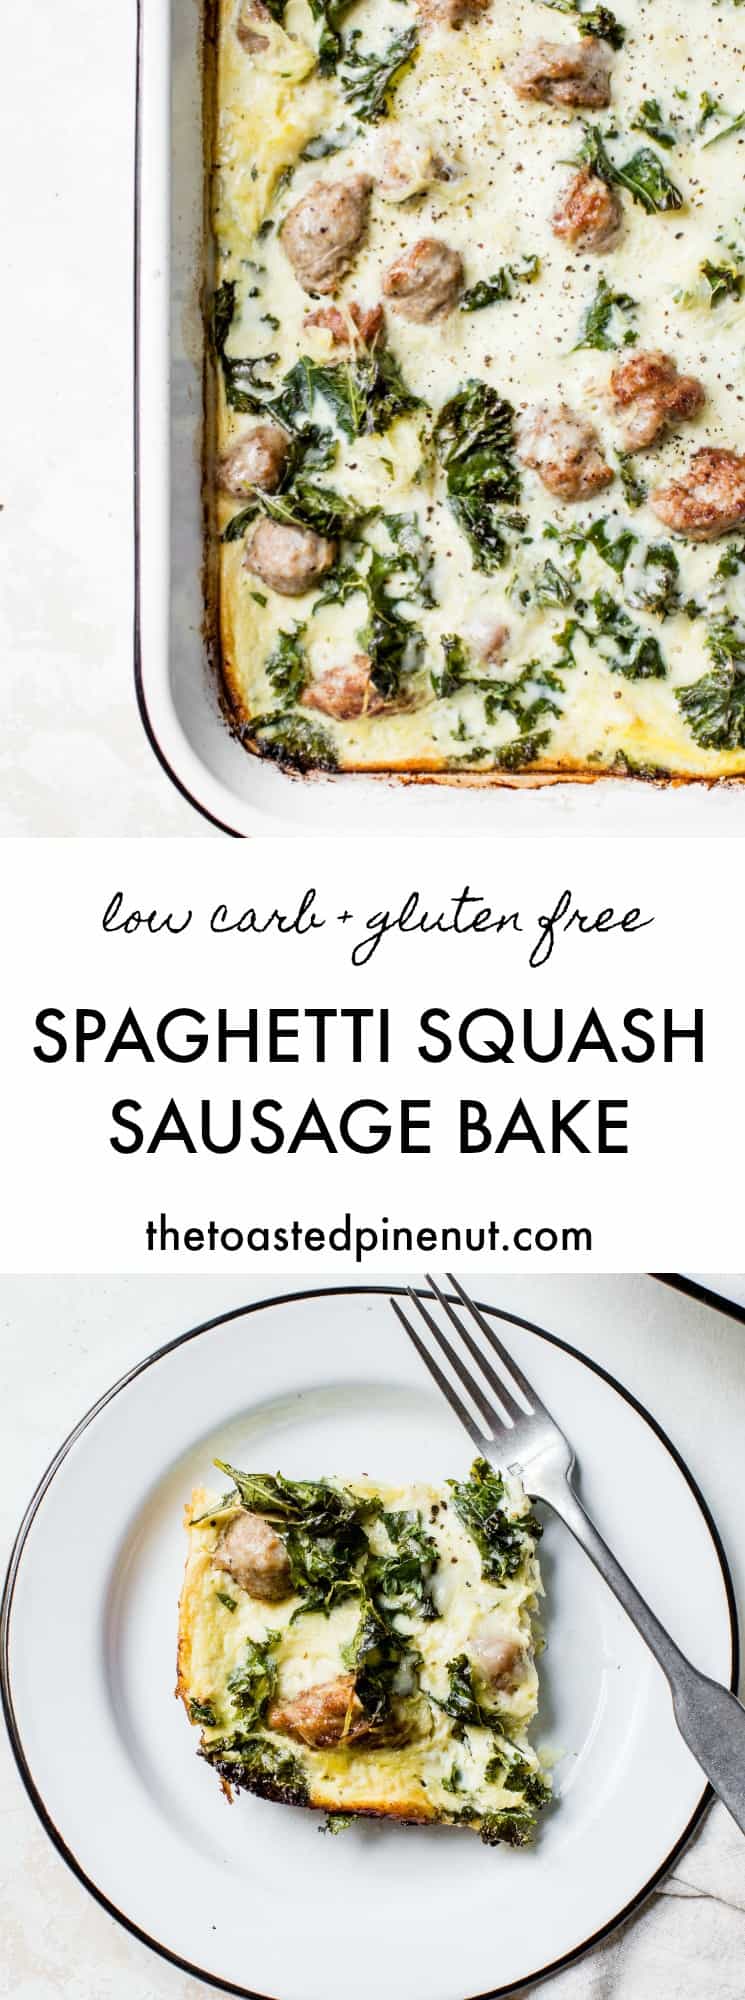 You'll love this Spaghetti Squash Sausage Bake as these months get colder. It's a hearty and filling meal but packed with wholesome, gluten free ingredients. thetoastedpinenut.com #thetoastedpinenut #lowcarb #glutenfree #keto #lowcarbdinner #ketodinner #ketorecipe #spaghettisquash #sausage #kale #casserole #glutenfreerecipe #glutenfreedinner